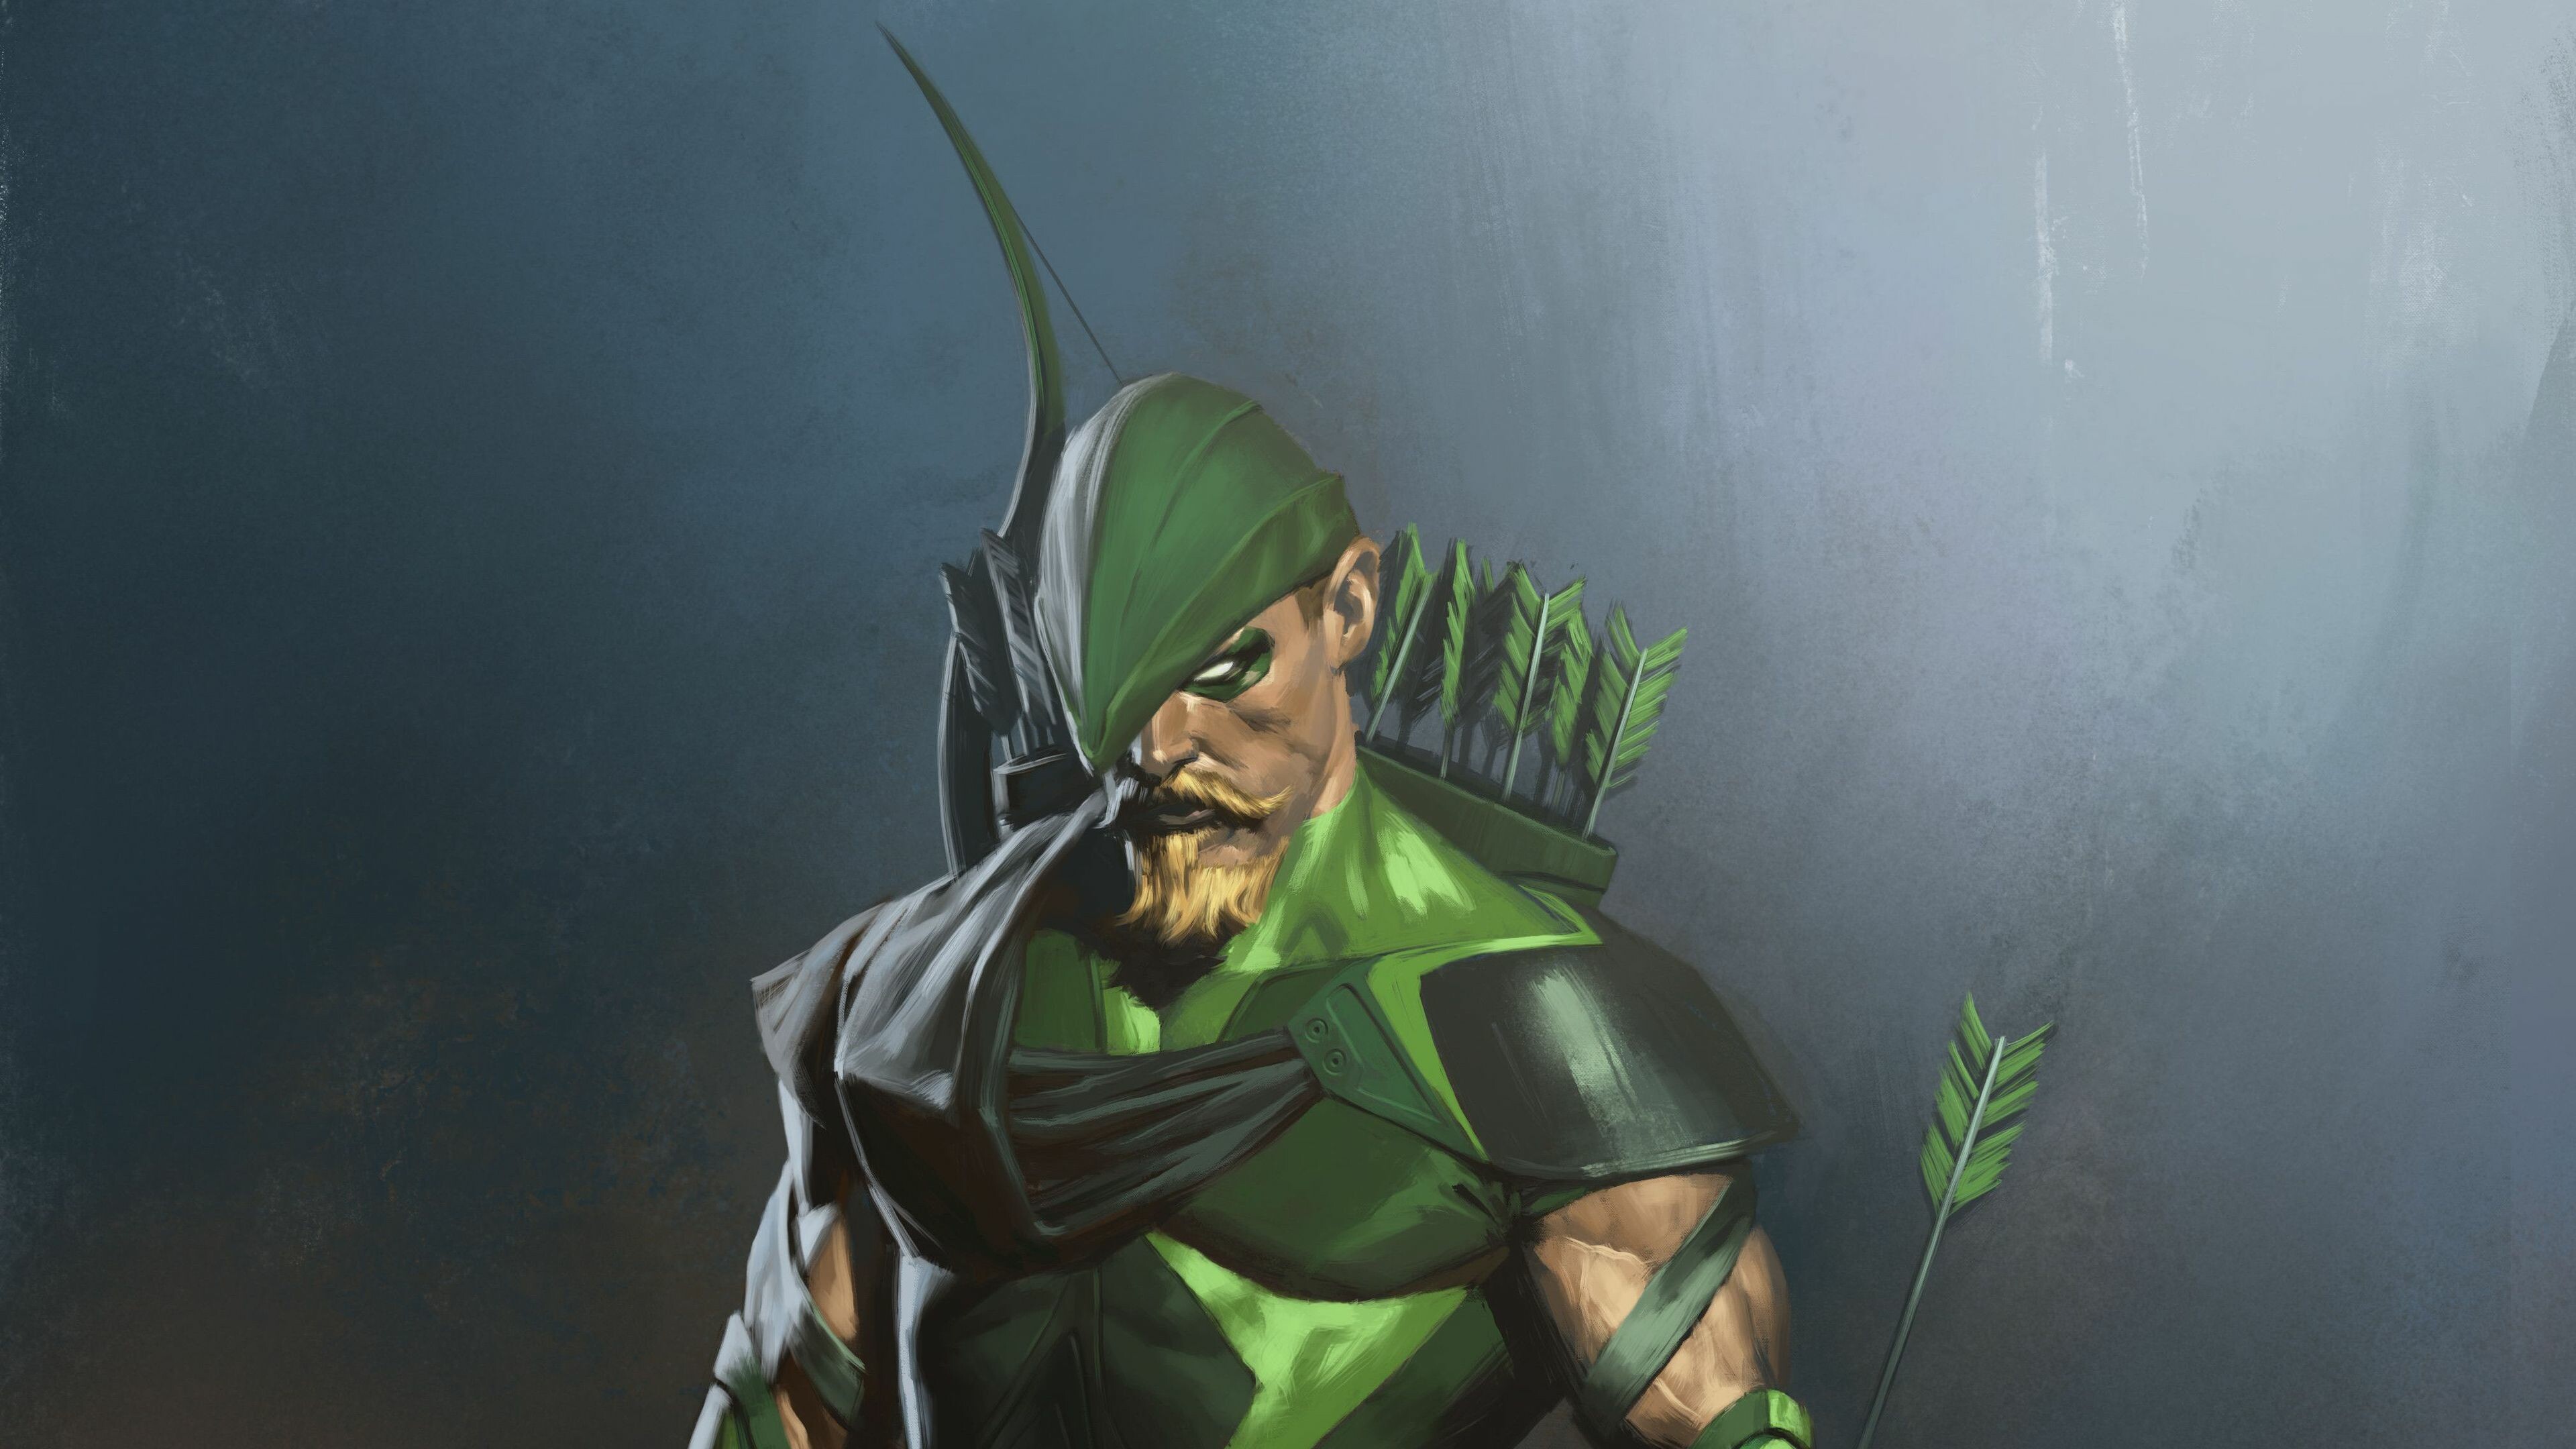 Green Arrow: A fictional character and superhero in the DC Comics and Universe. 3840x2160 4K Wallpaper.